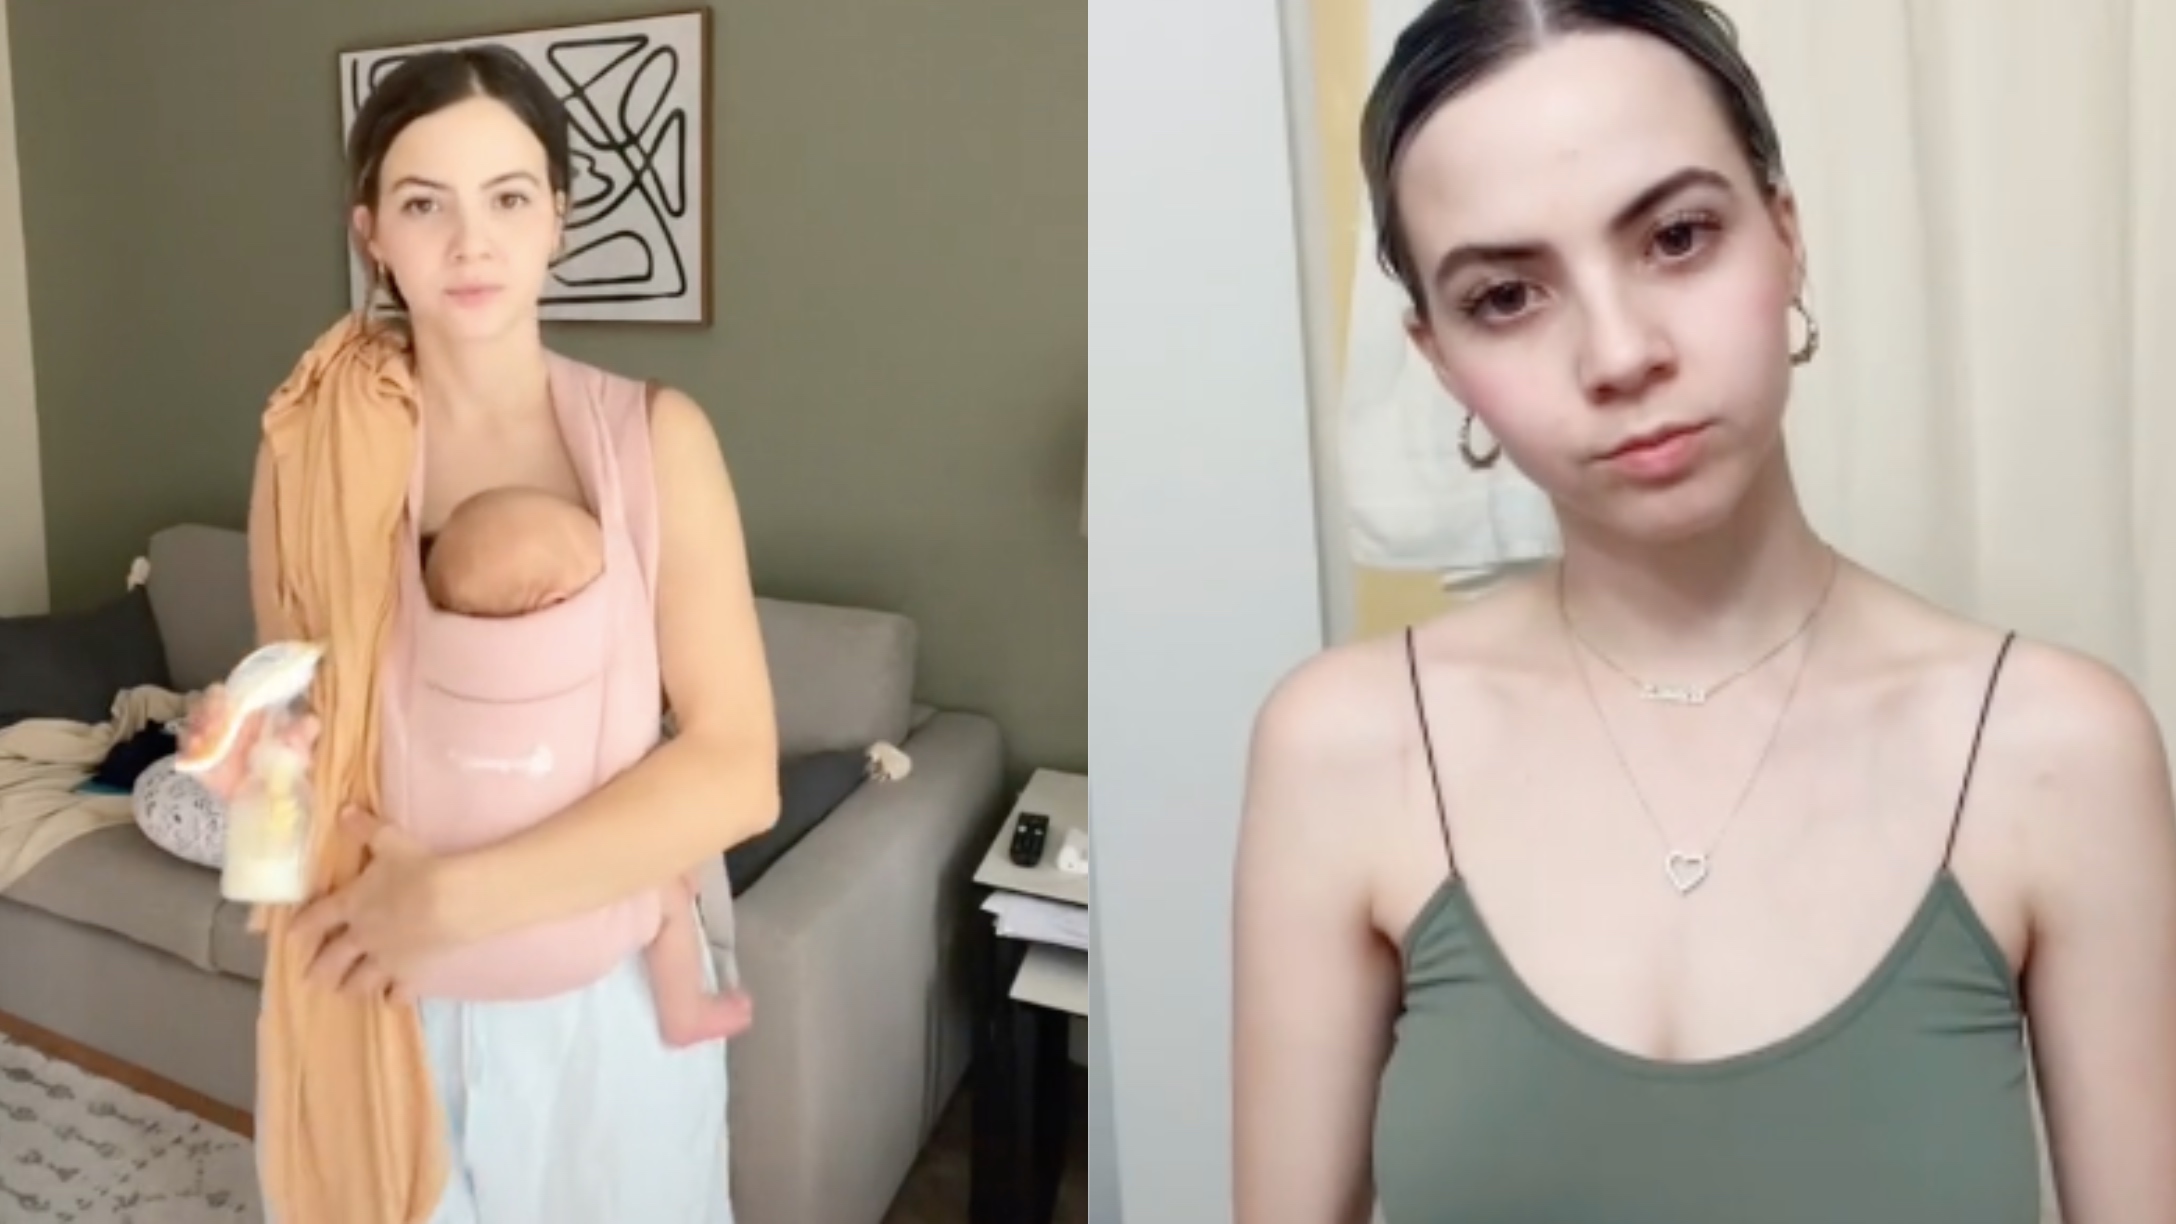 Is It Normal To Have Different-Sized Boobs?